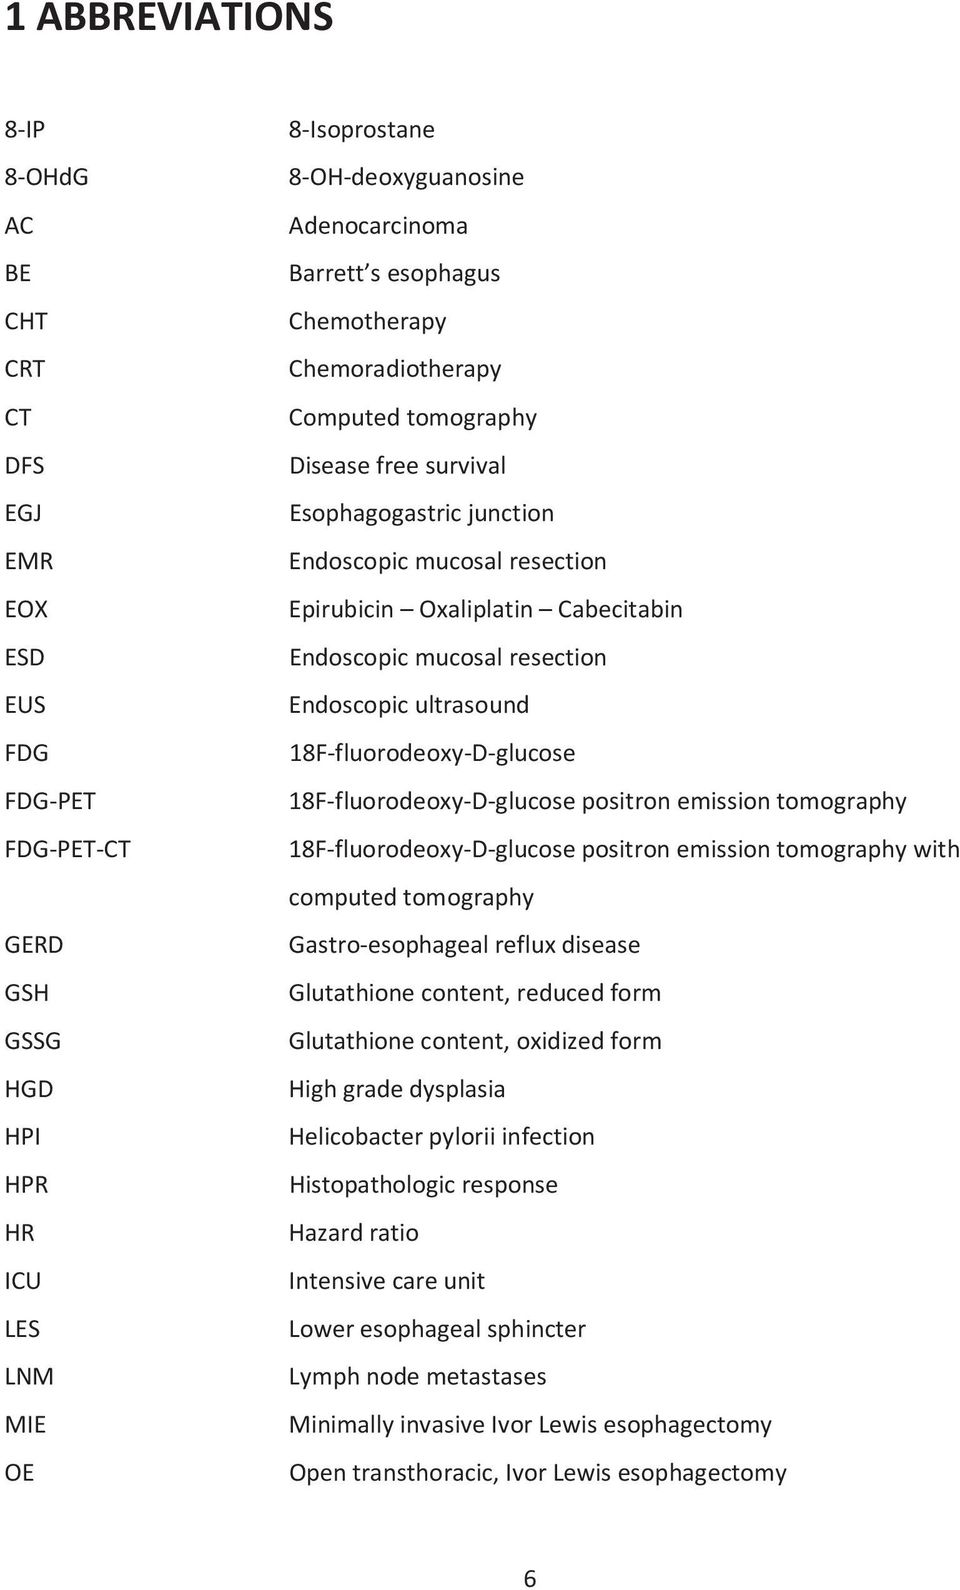 resection Endoscopic ultrasound 18F-fluorodeoxy-D-glucose 18F-fluorodeoxy-D-glucose positron emission tomography 18F-fluorodeoxy-D-glucose positron emission tomography with computed tomography